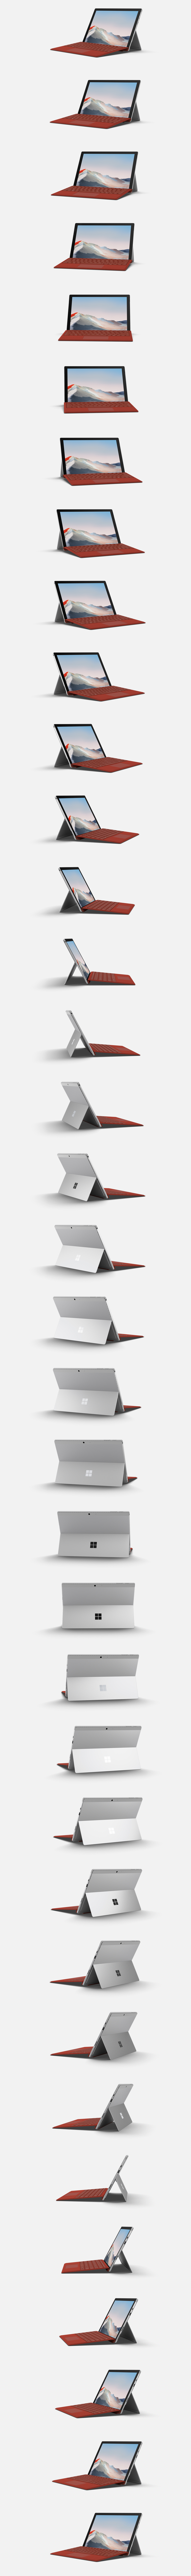 Surface Pro 7+ for Business.